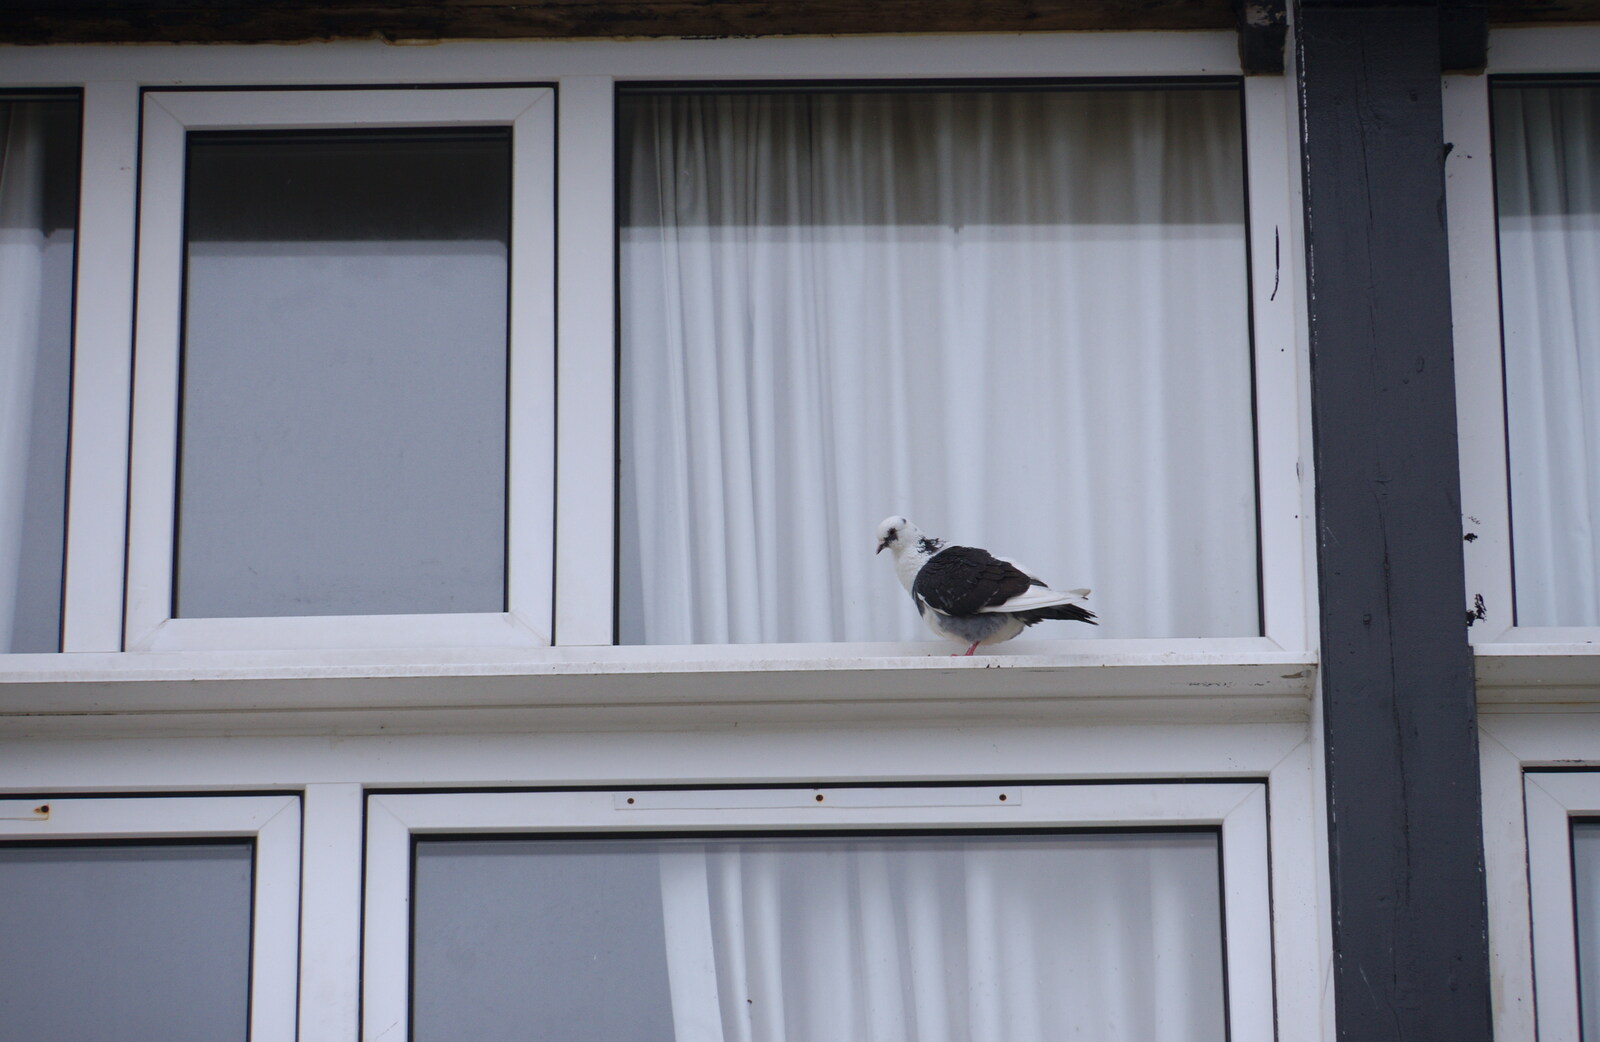 A pigeon on a windowsill from Kelling Camping and the Potty Morris Festival, Sheringham, North Norfolk - 6th July 2019